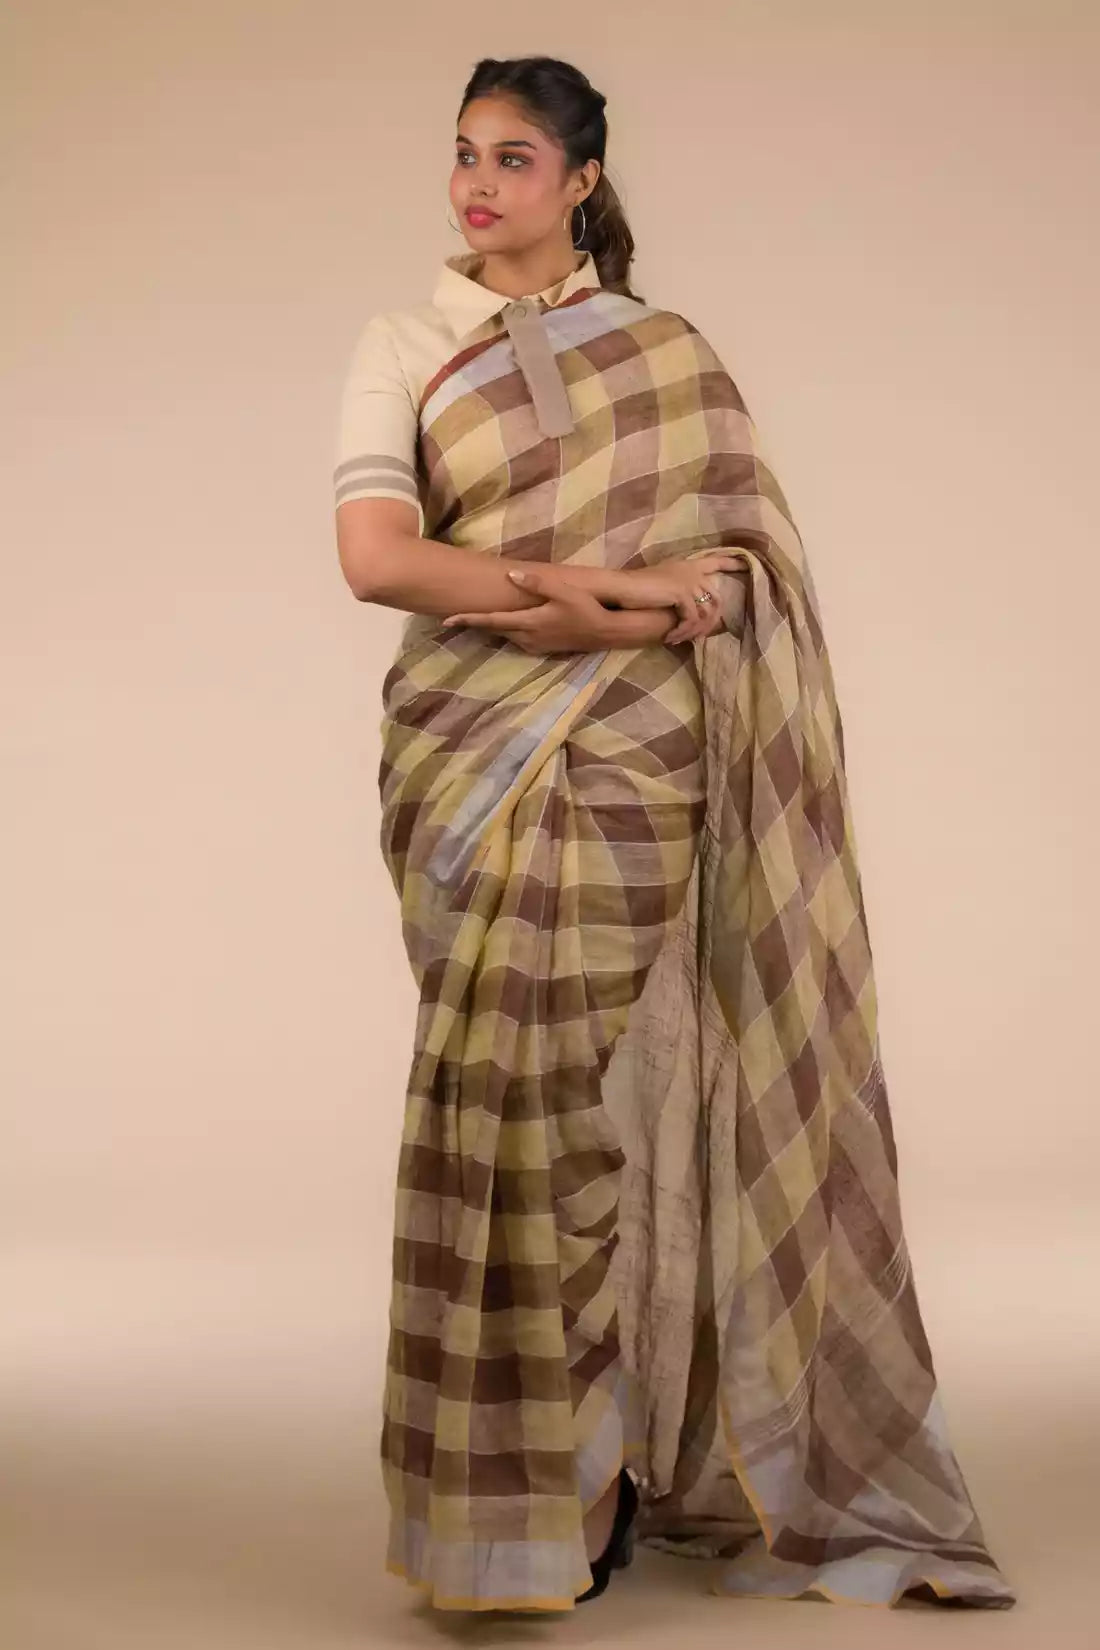 side view of a woman in ethnic posing wearing brown & beige checks saree with tie top blouse and black heels